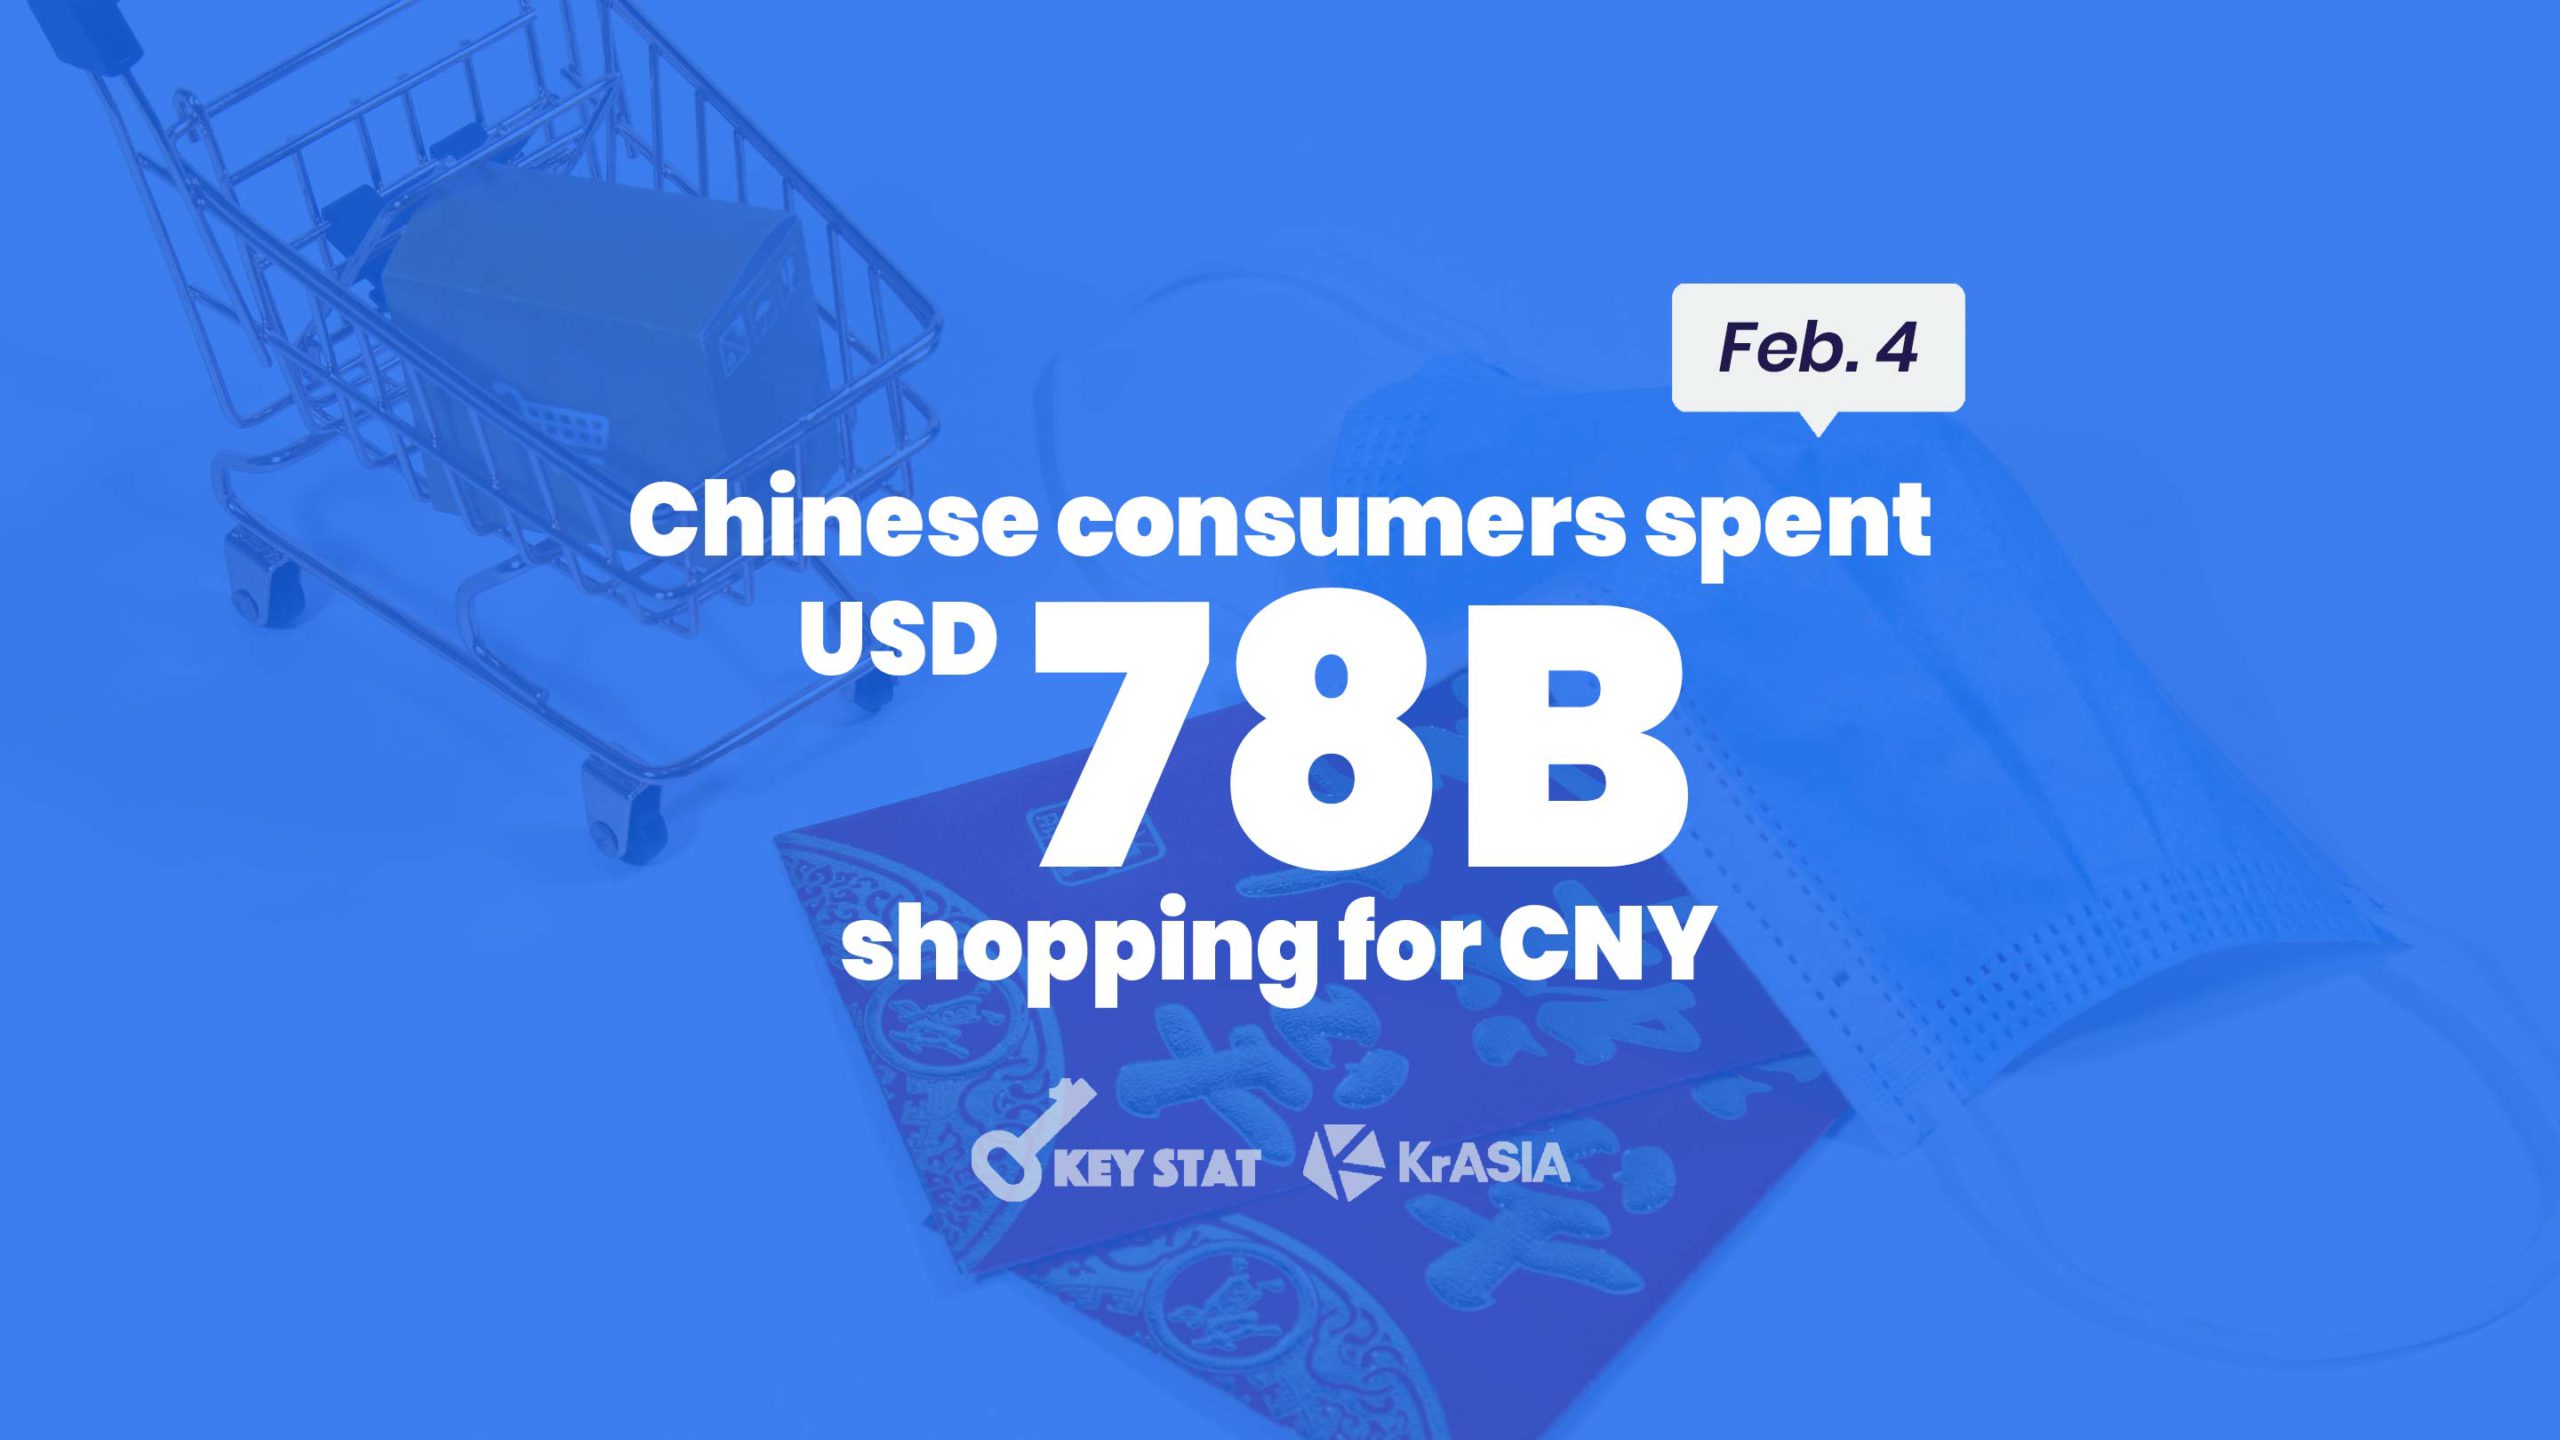 KEY STAT | Chinese turn to e-commerce for CNY holiday shopping